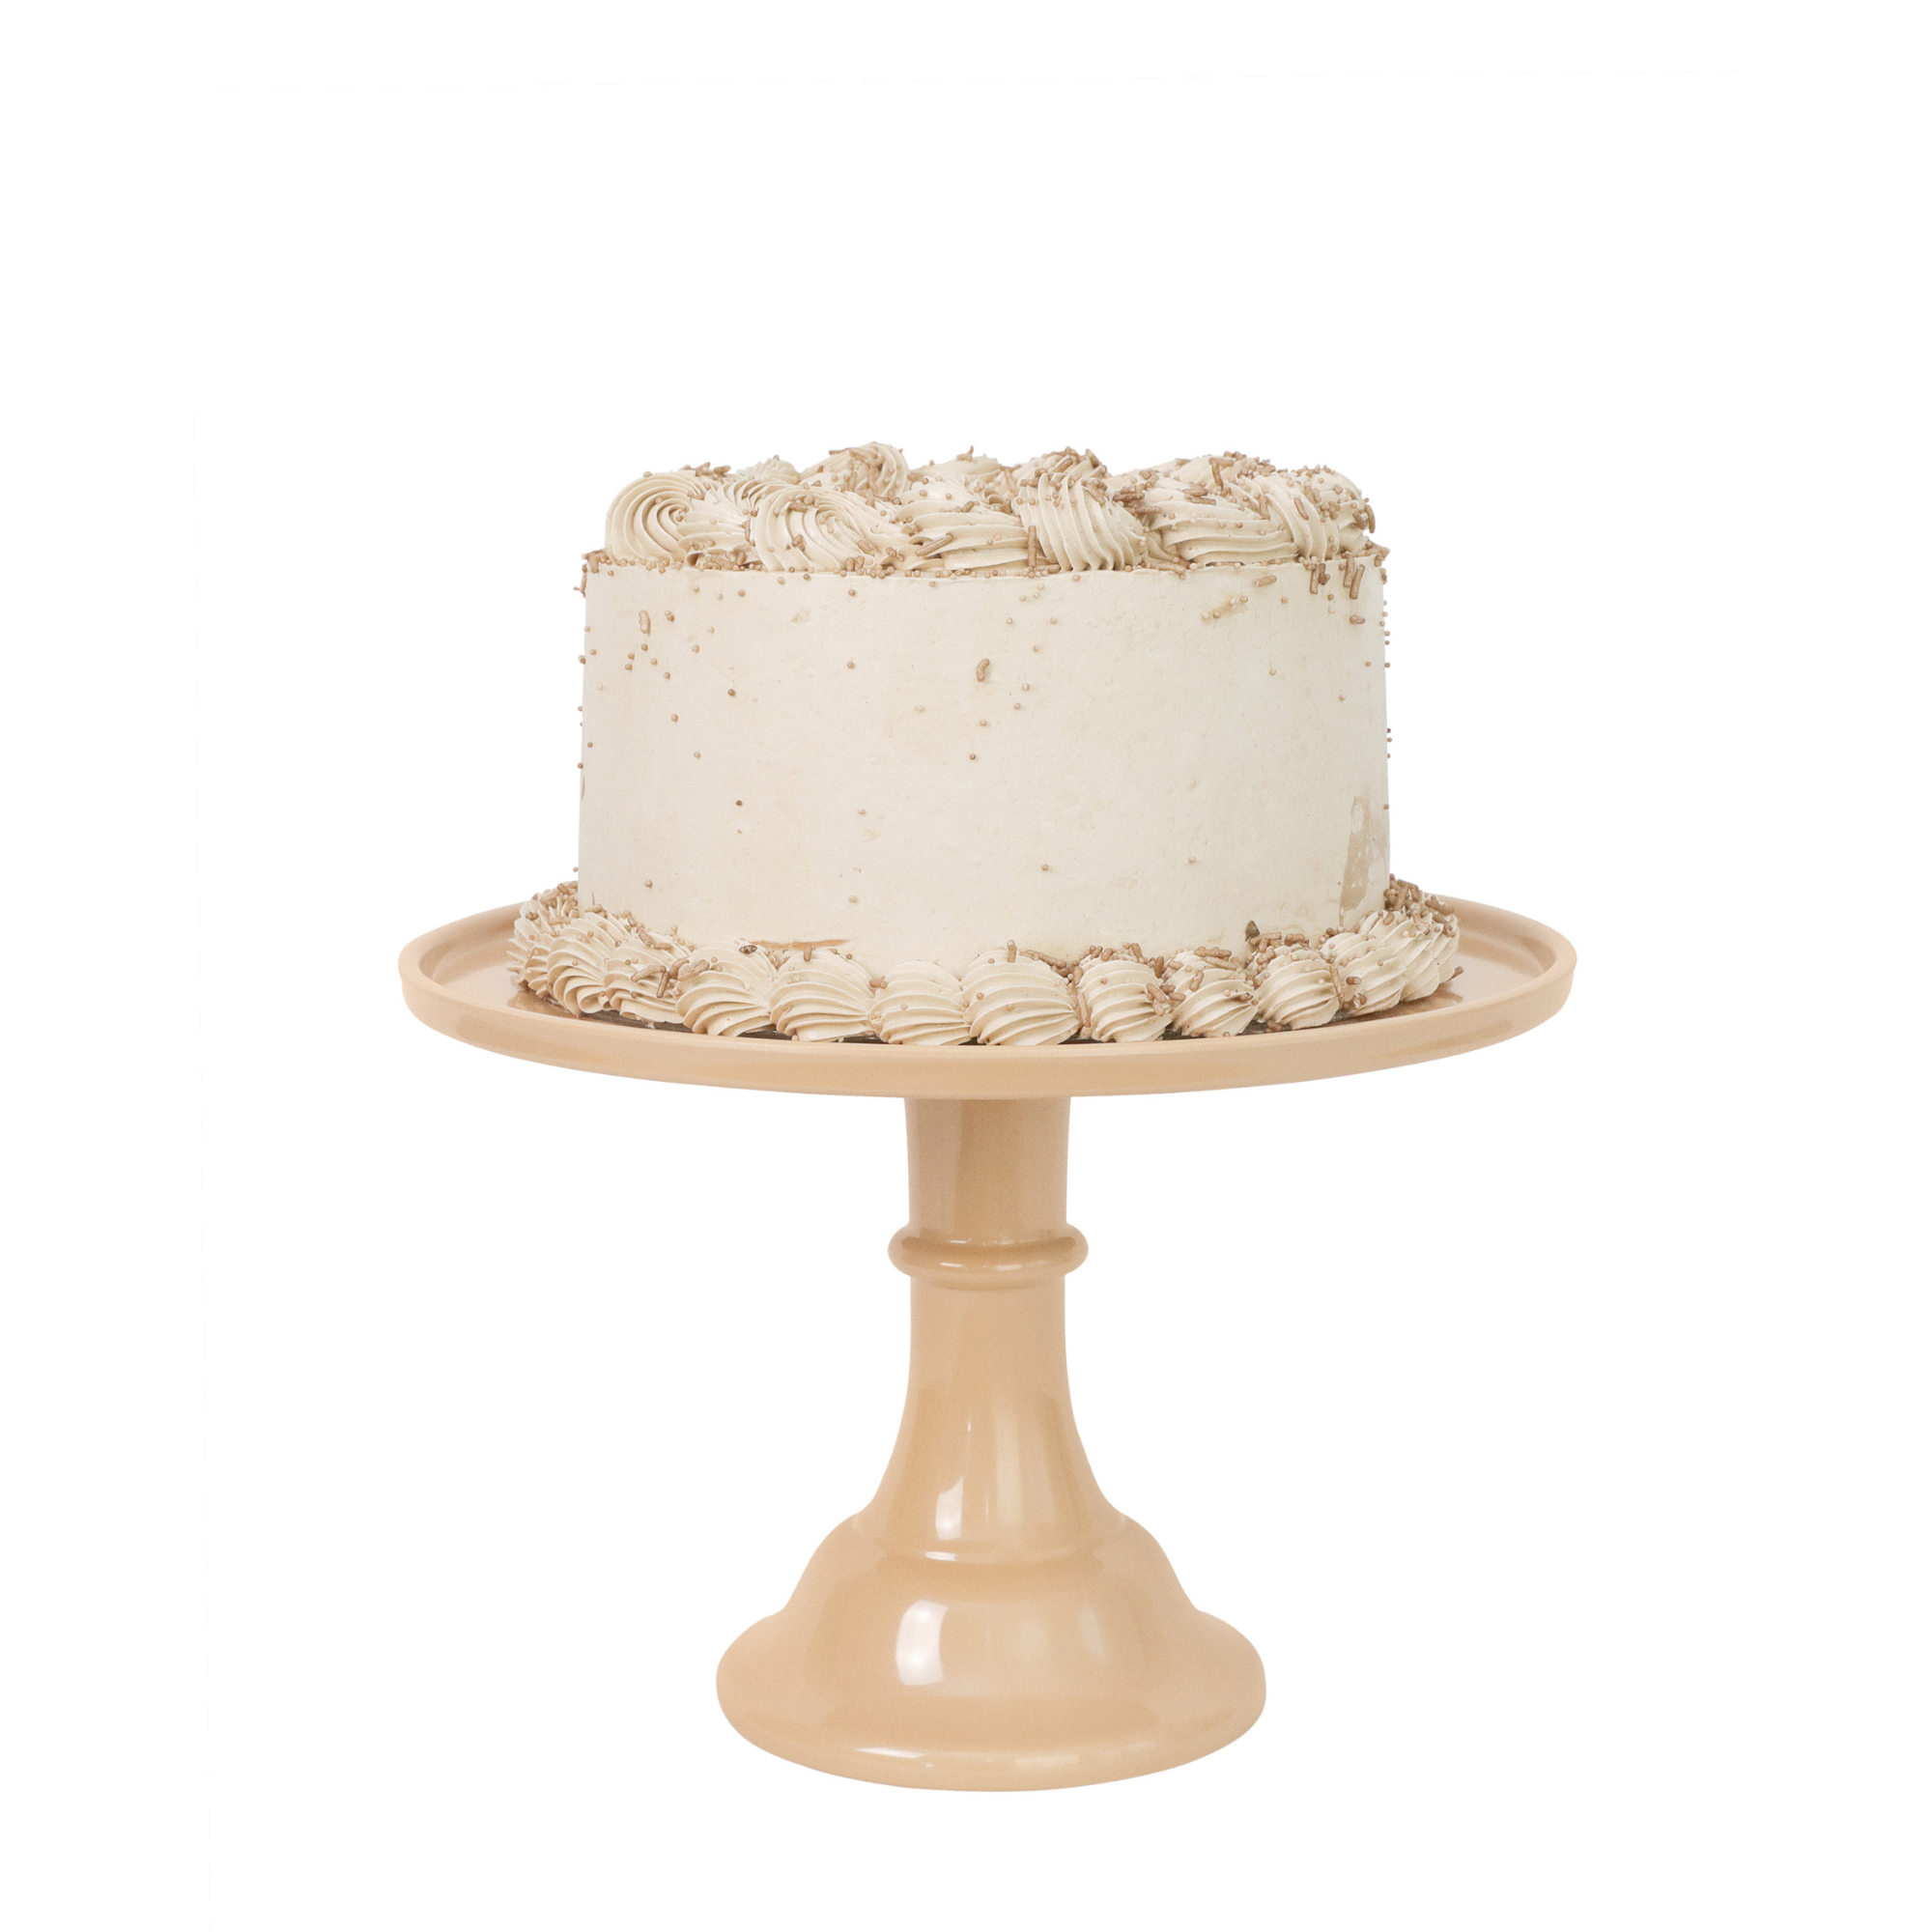 Pembroke Cake Stand with cloche, Small - Soho Home